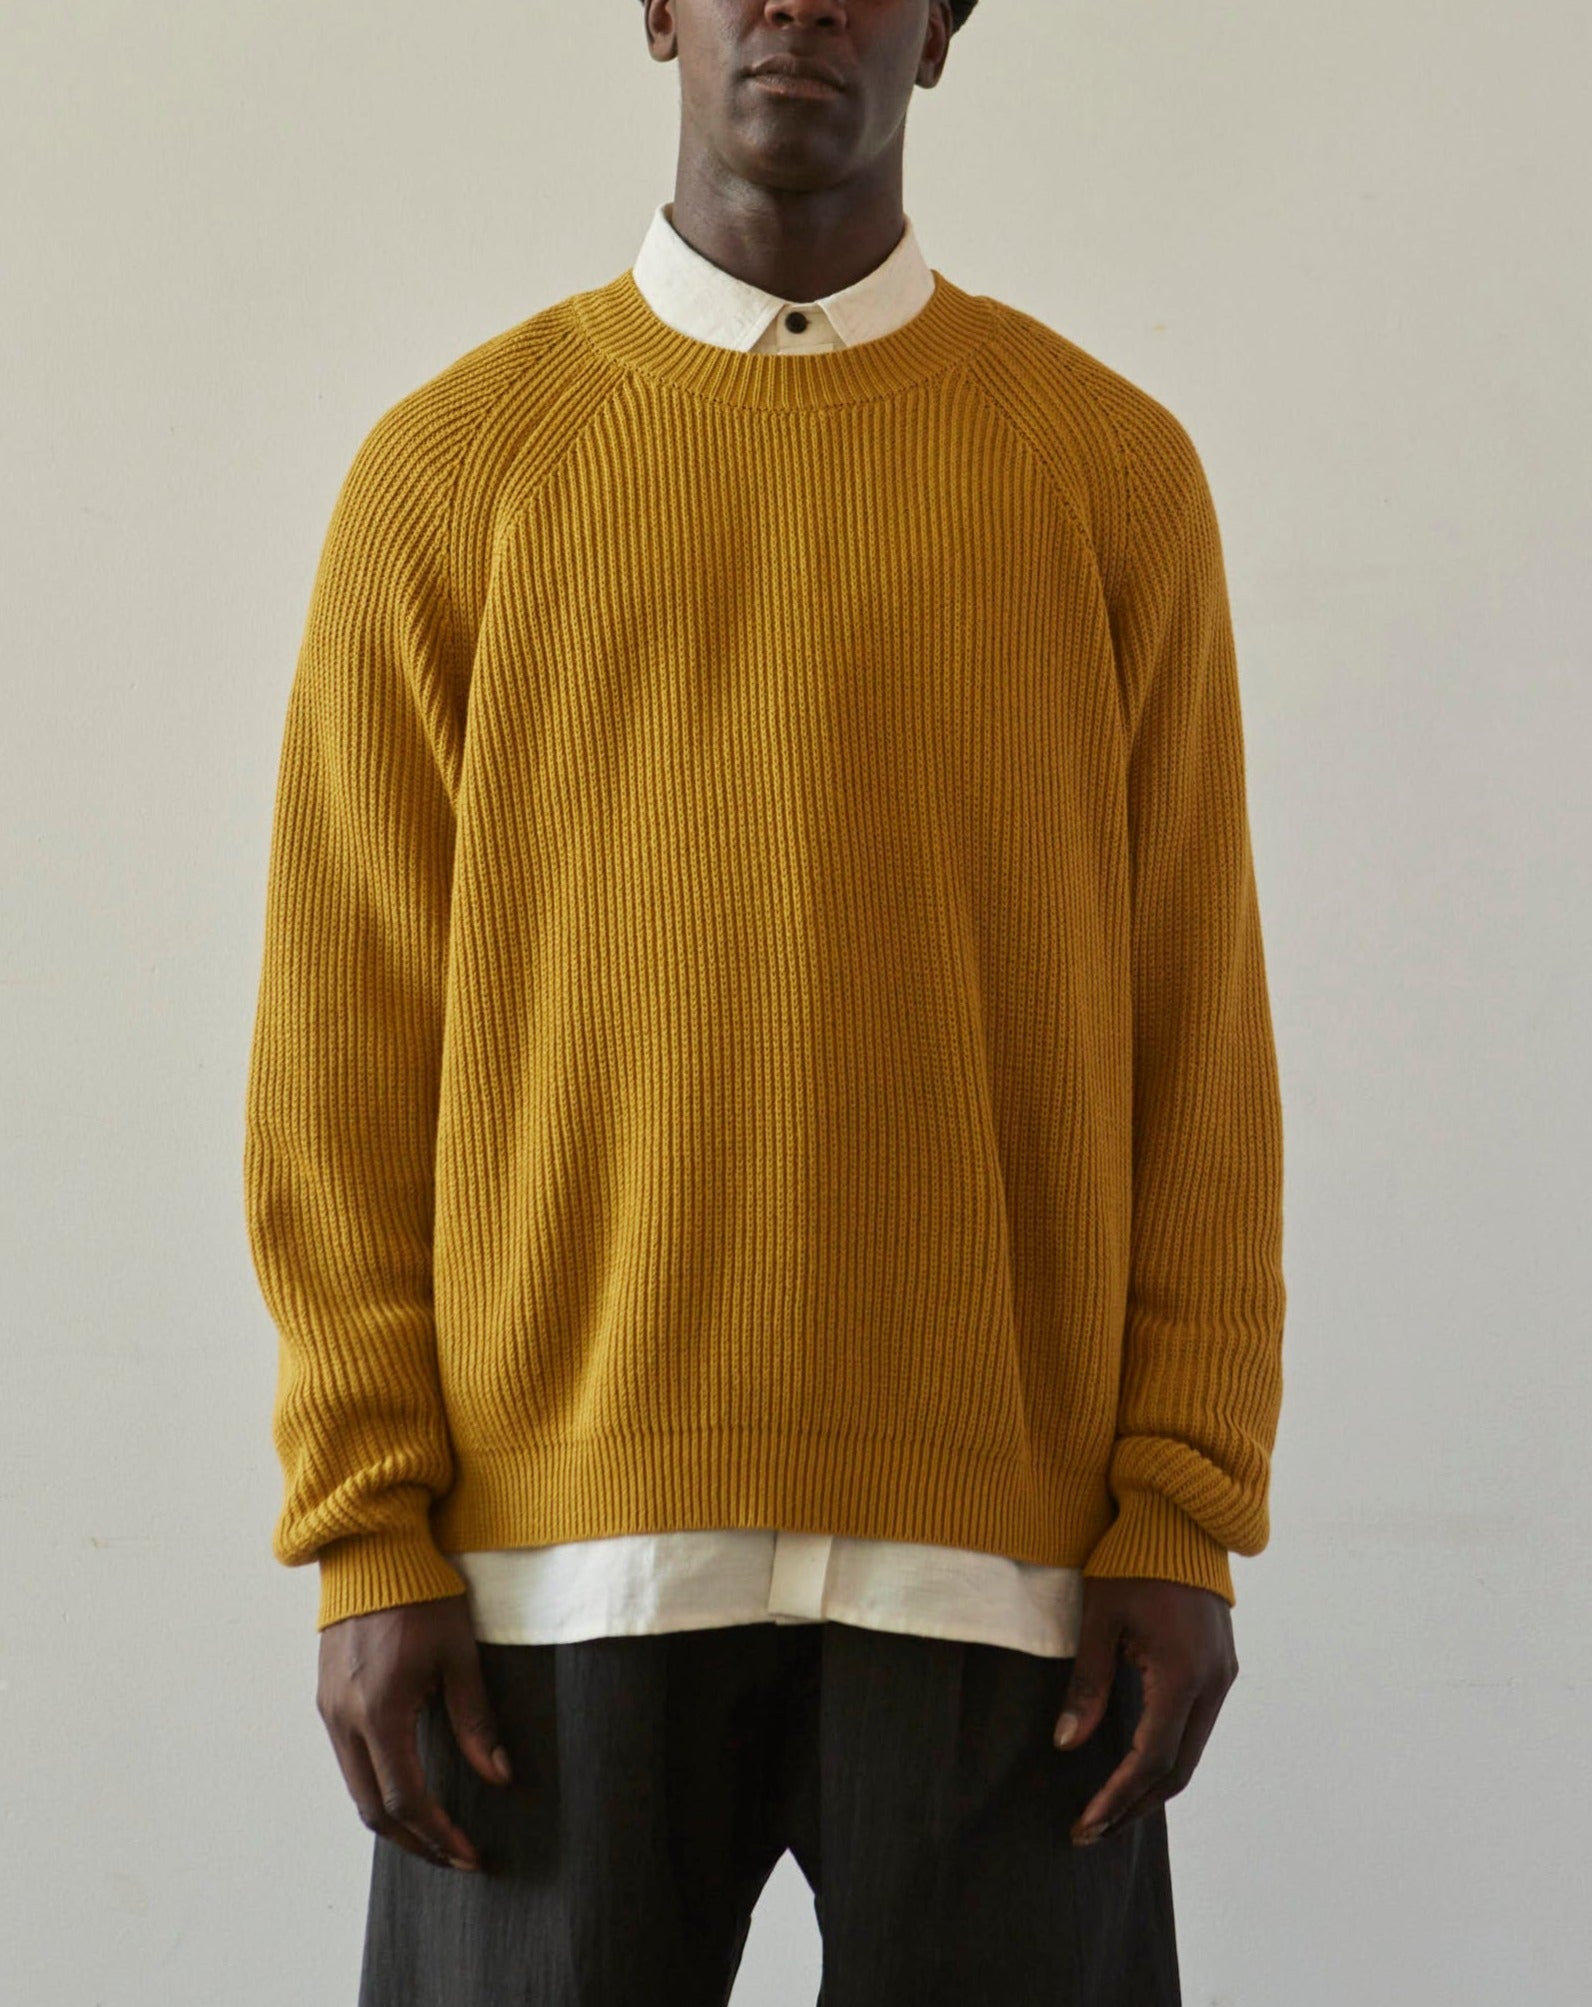 O-Project Knitted Crewneck, Yellow Gold | Glasswing